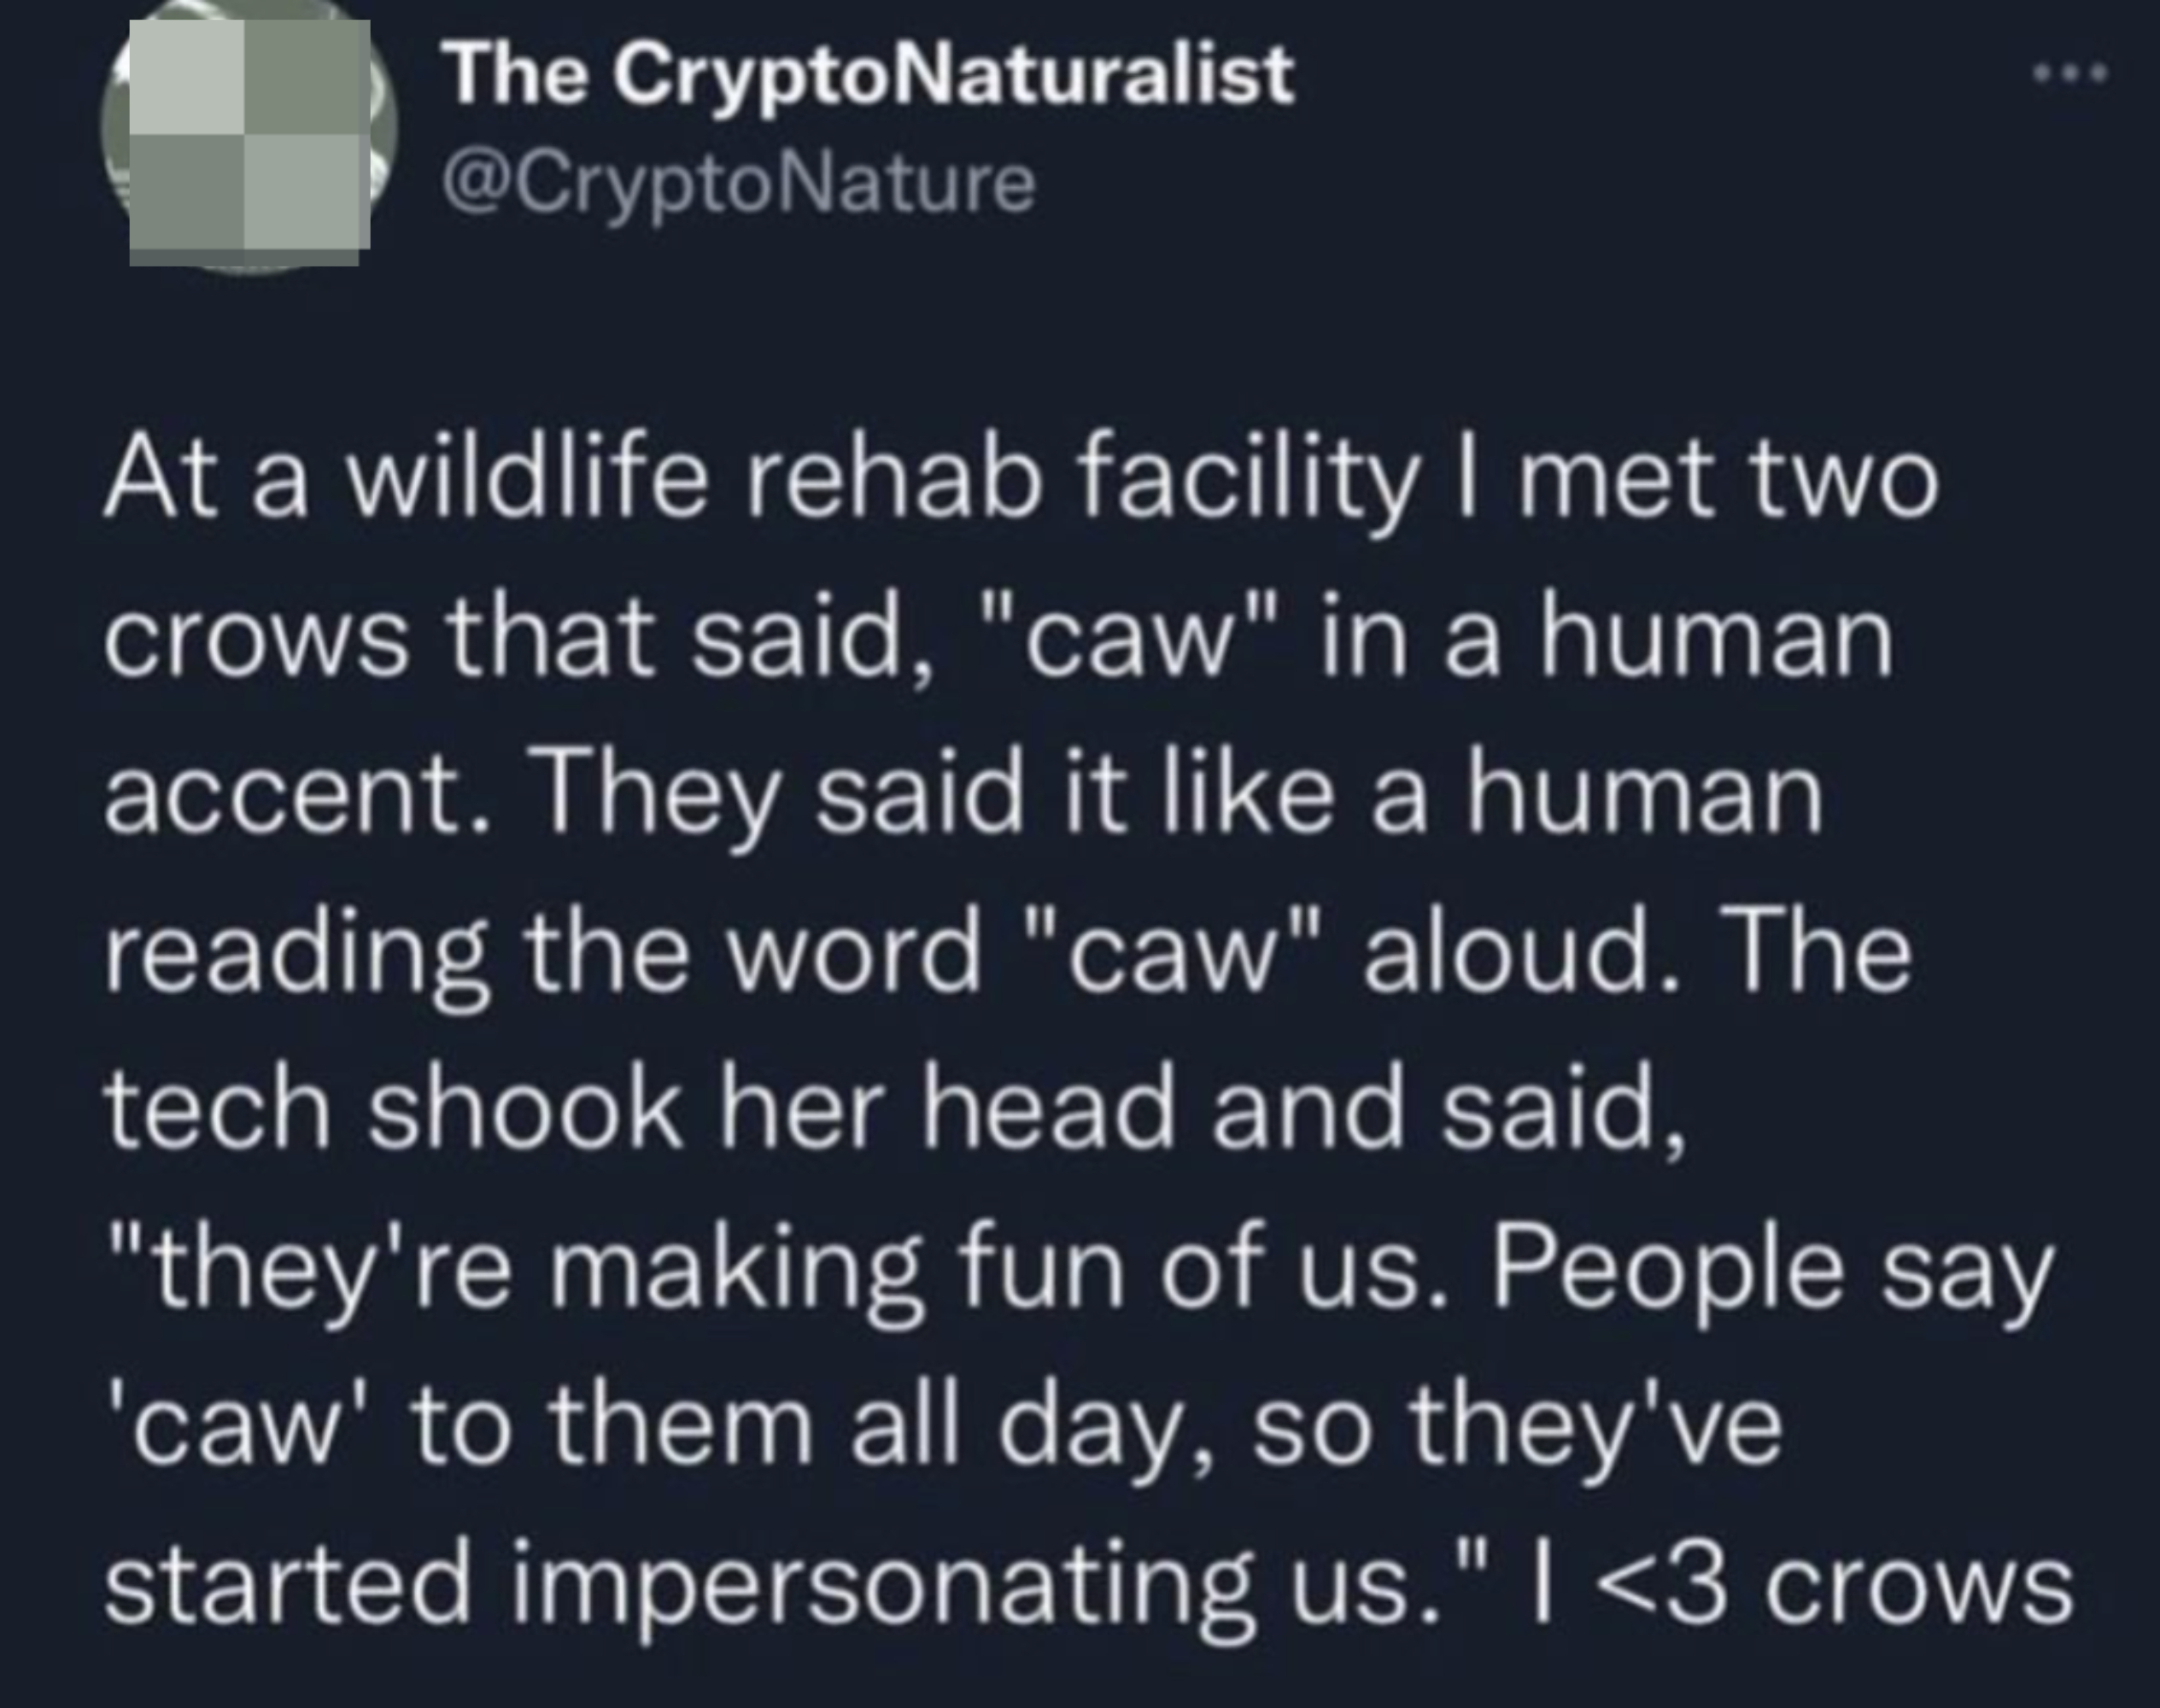 Crows at a wildlife rehab facility say &quot;caw&quot; in a human accent; the tech says &quot;they&#x27;re making fun of us; people say &#x27;caw&#x27; to them all day, so they&#x27;ve started impersonating us&quot;